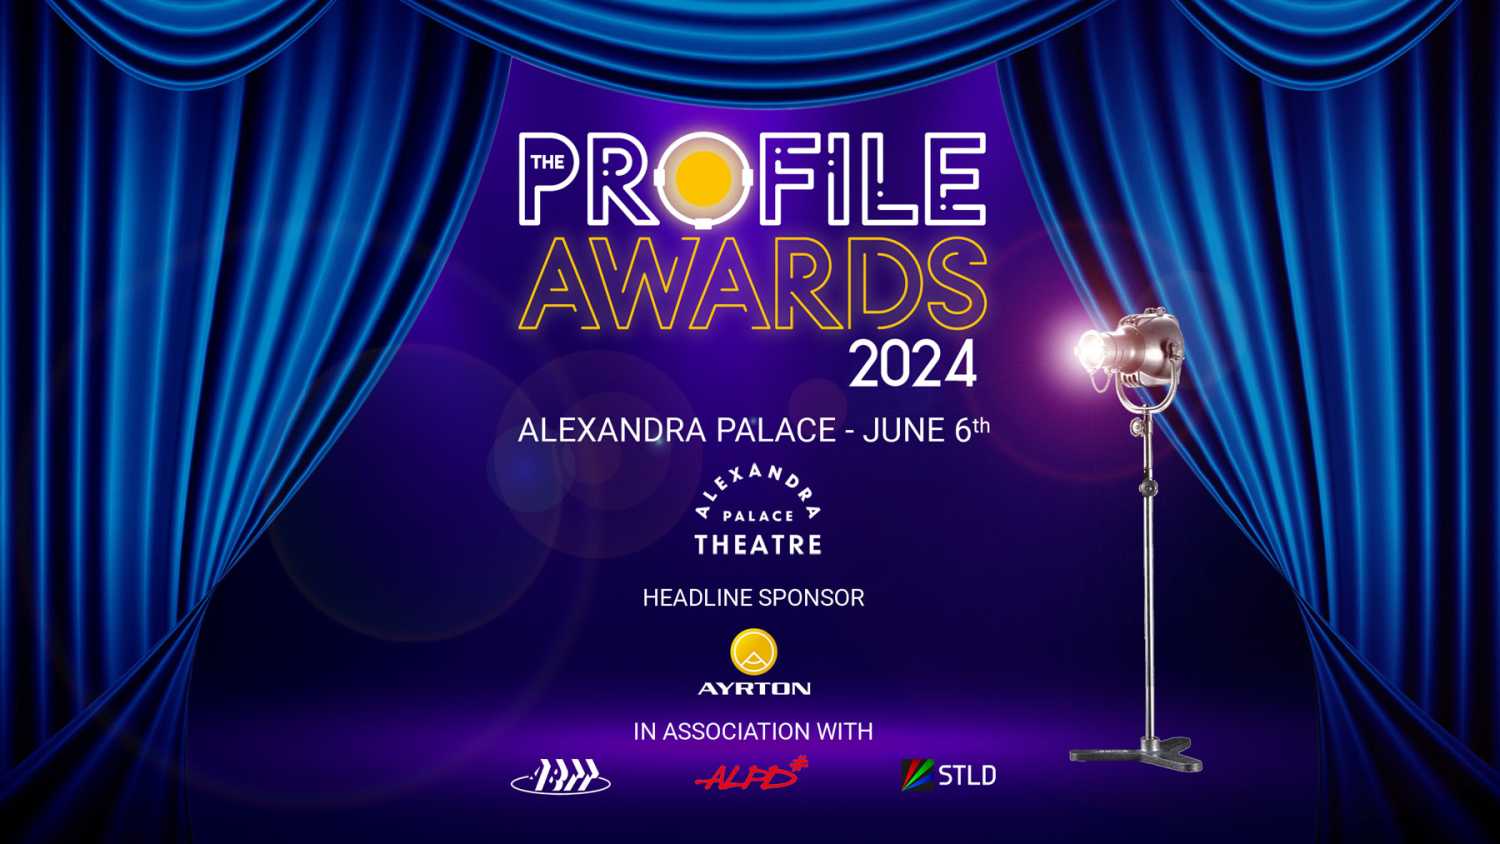 The Profile Awards will take place on 6 June at Alexandra Palace